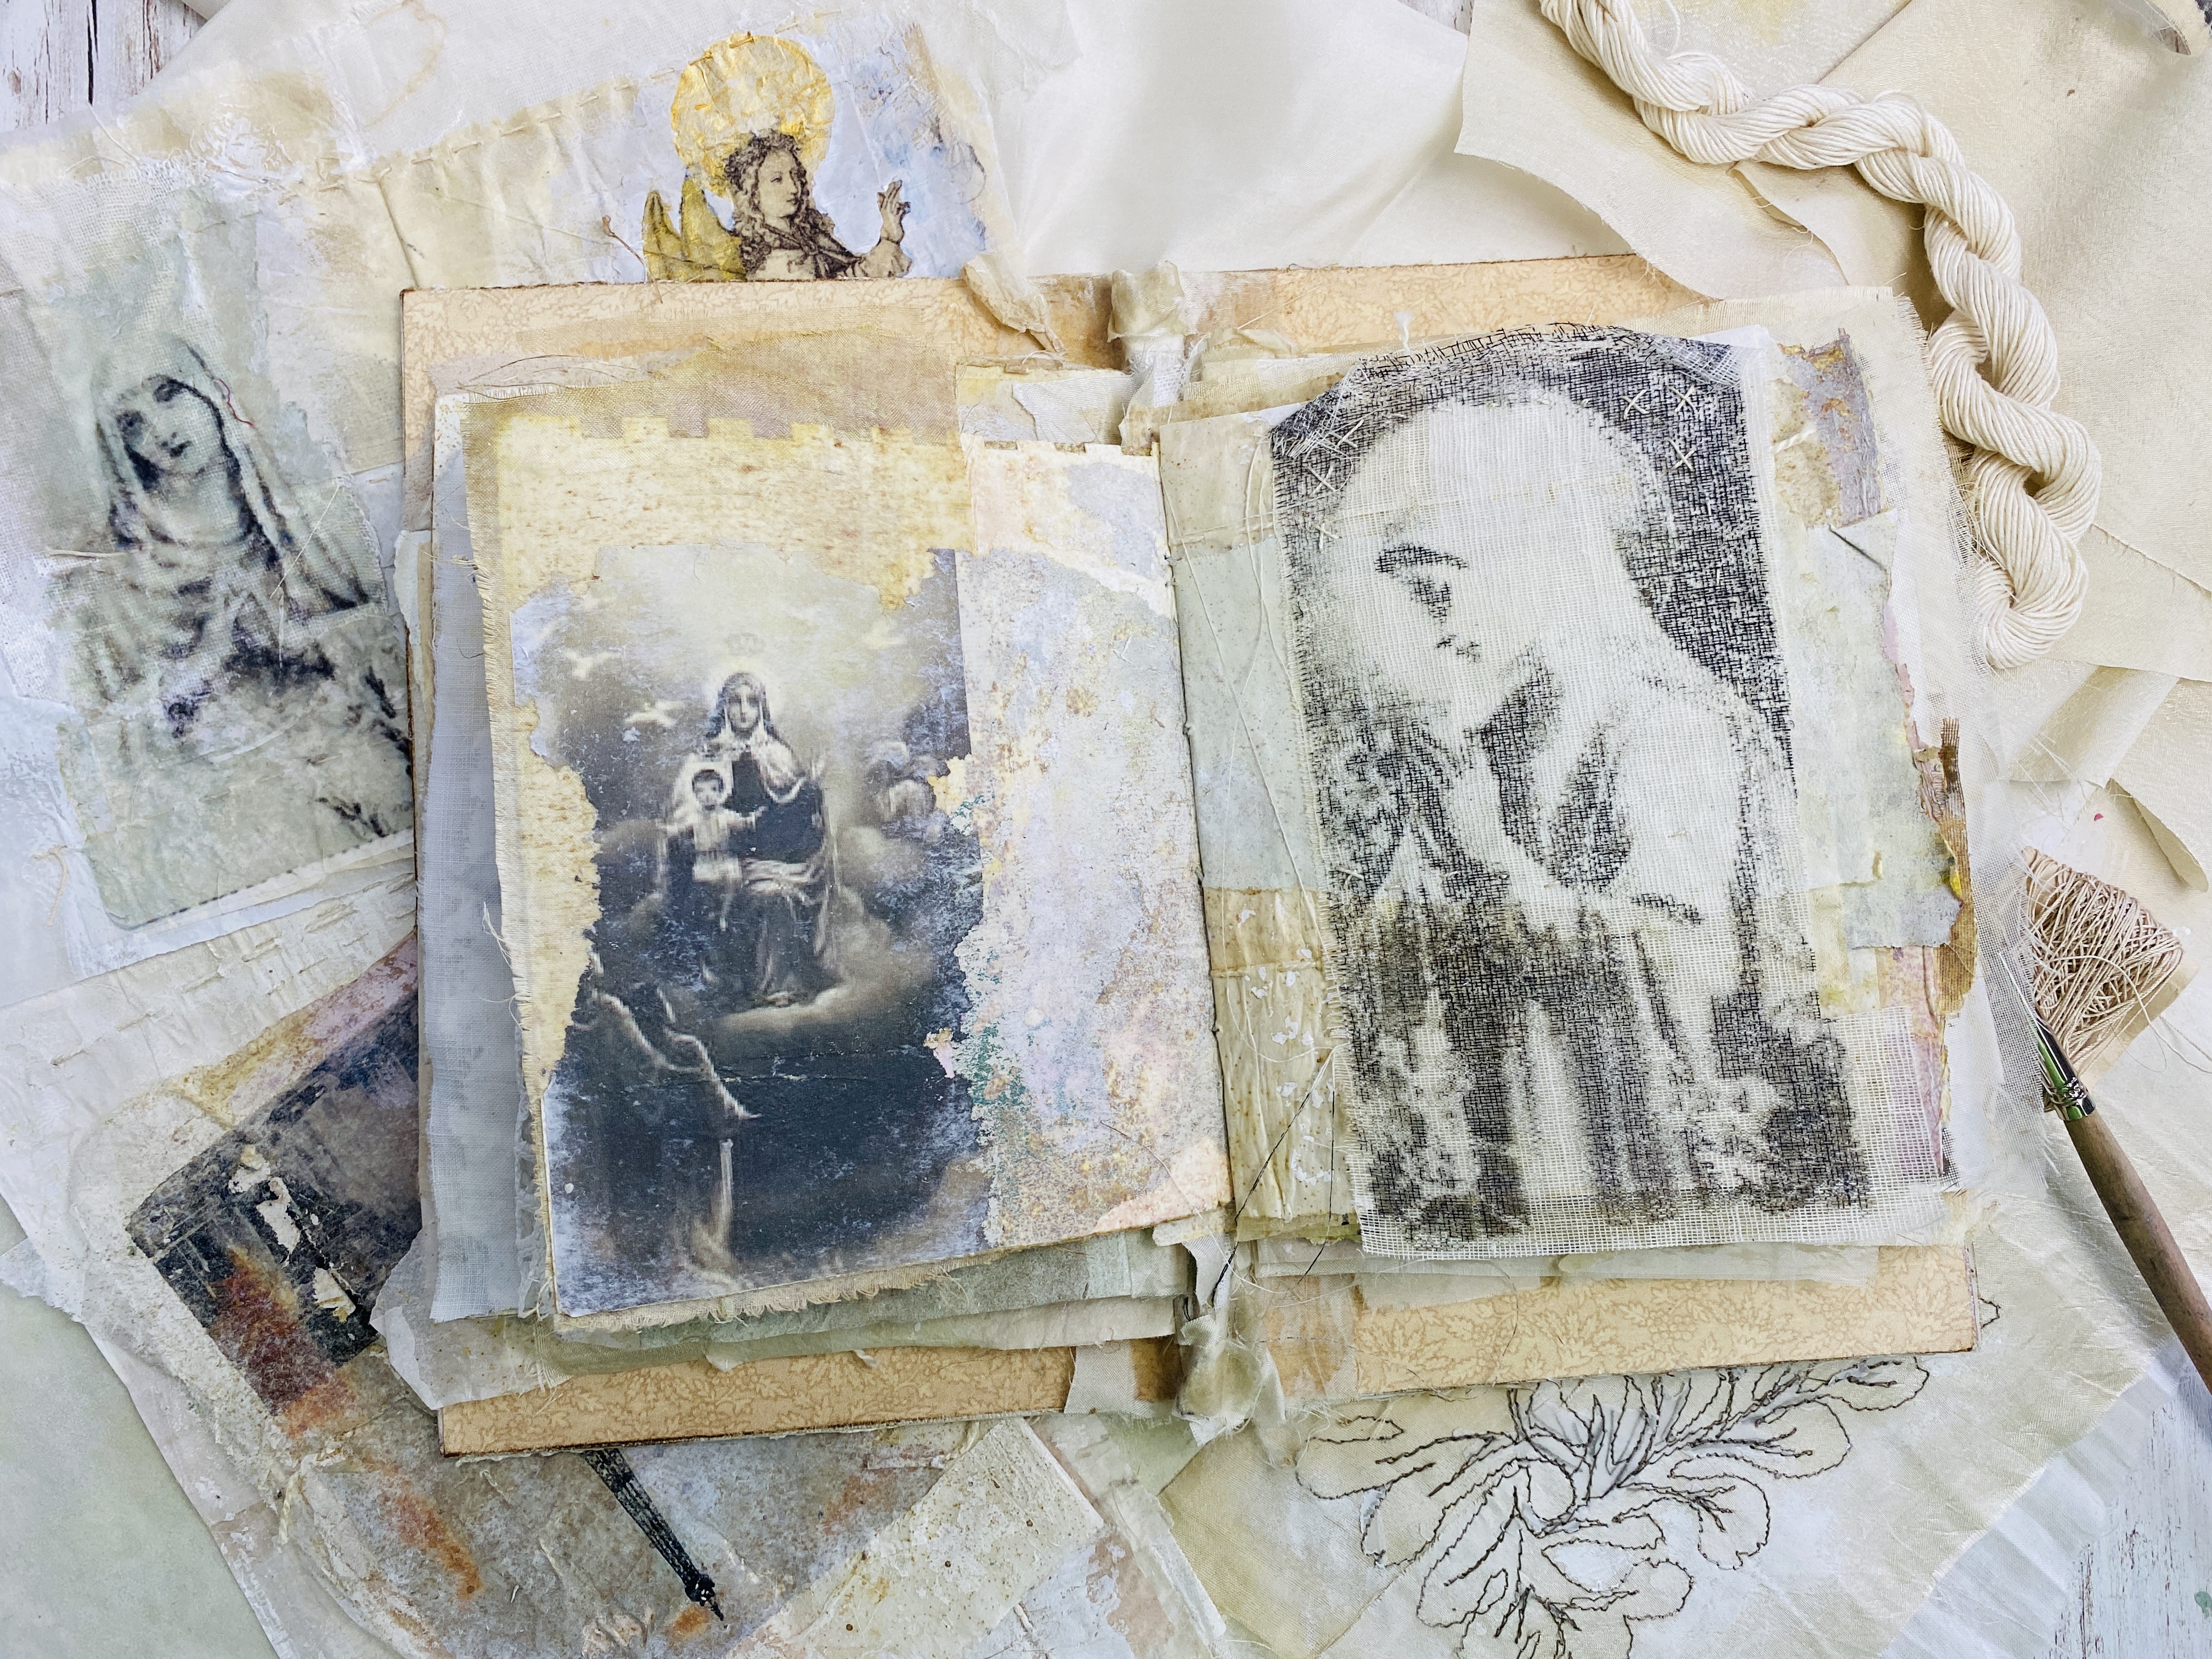 Books and artworks with aged looking textures